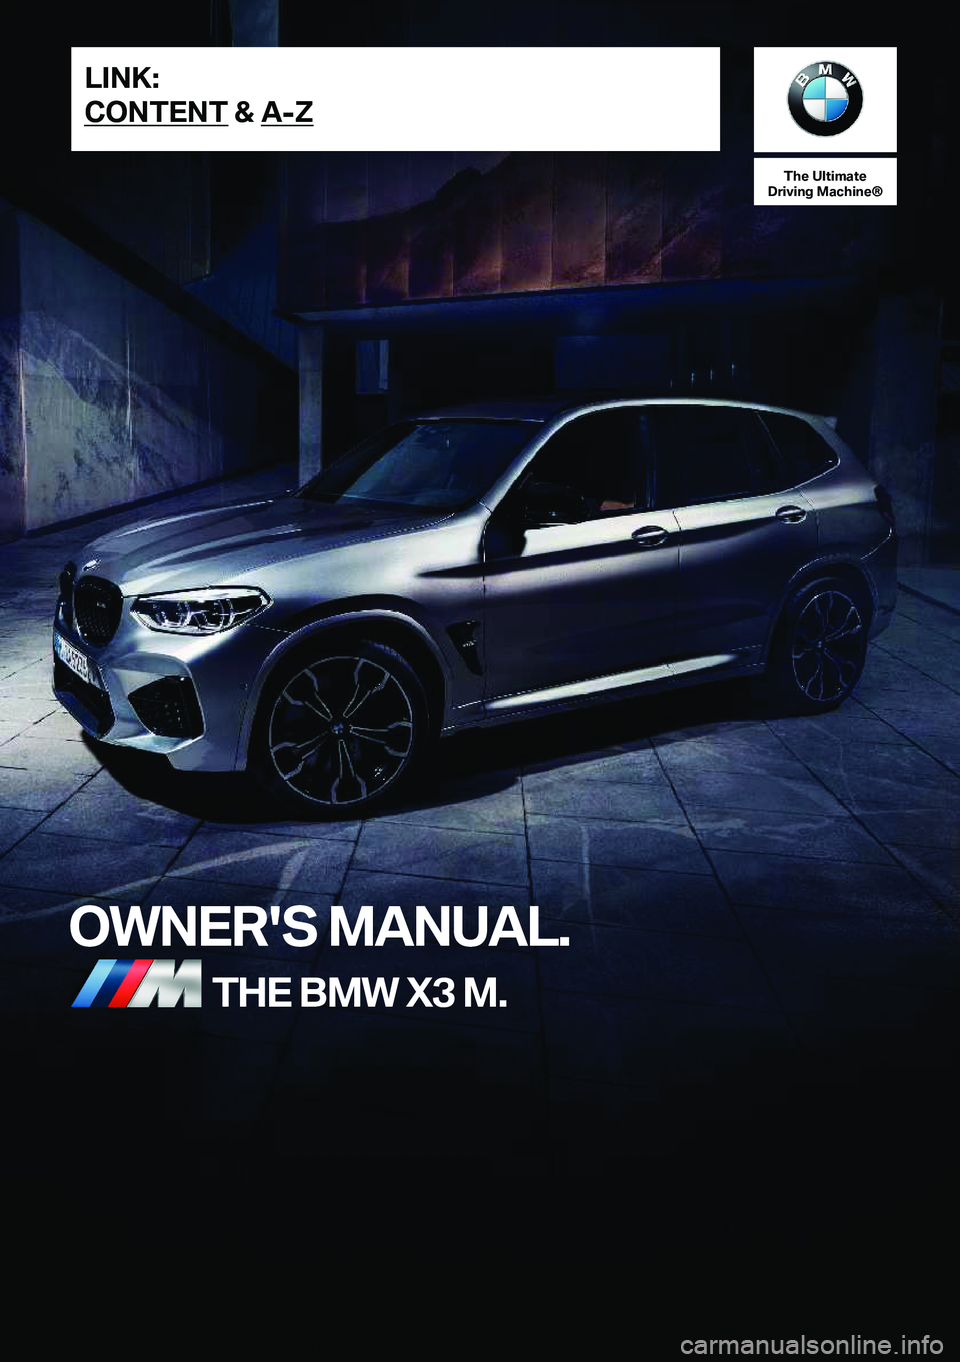 BMW X3 M 2020  Owners Manual �T�h�e��U�l�t�i�m�a�t�e
�D�r�i�v�i�n�g��M�a�c�h�i�n�e�n
�O�W�N�E�R�'�S��M�A�N�U�A�L�.�T�H�E��B�M�W��X�3��M�.�L�I�N�K�:
�C�O�N�T�E�N�T��&��A�-�Z�O�n�l�i�n�e��E�d�i�t�i�o�n��f�o�r��P�a�r�